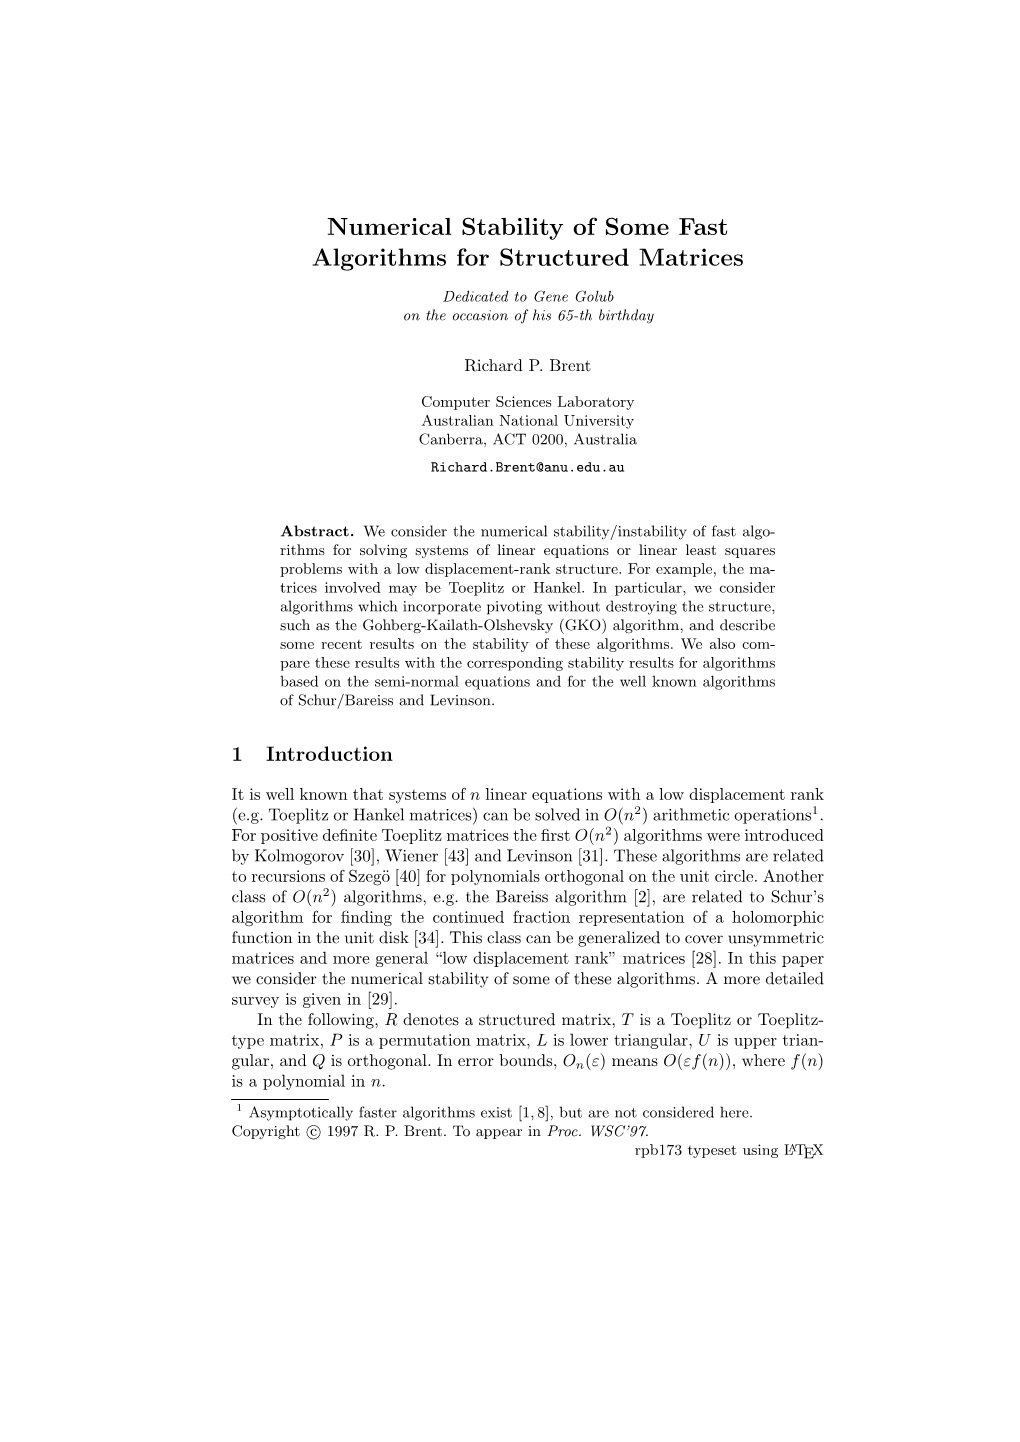 Numerical Stability of Some Fast Algorithms for Structured Matrices